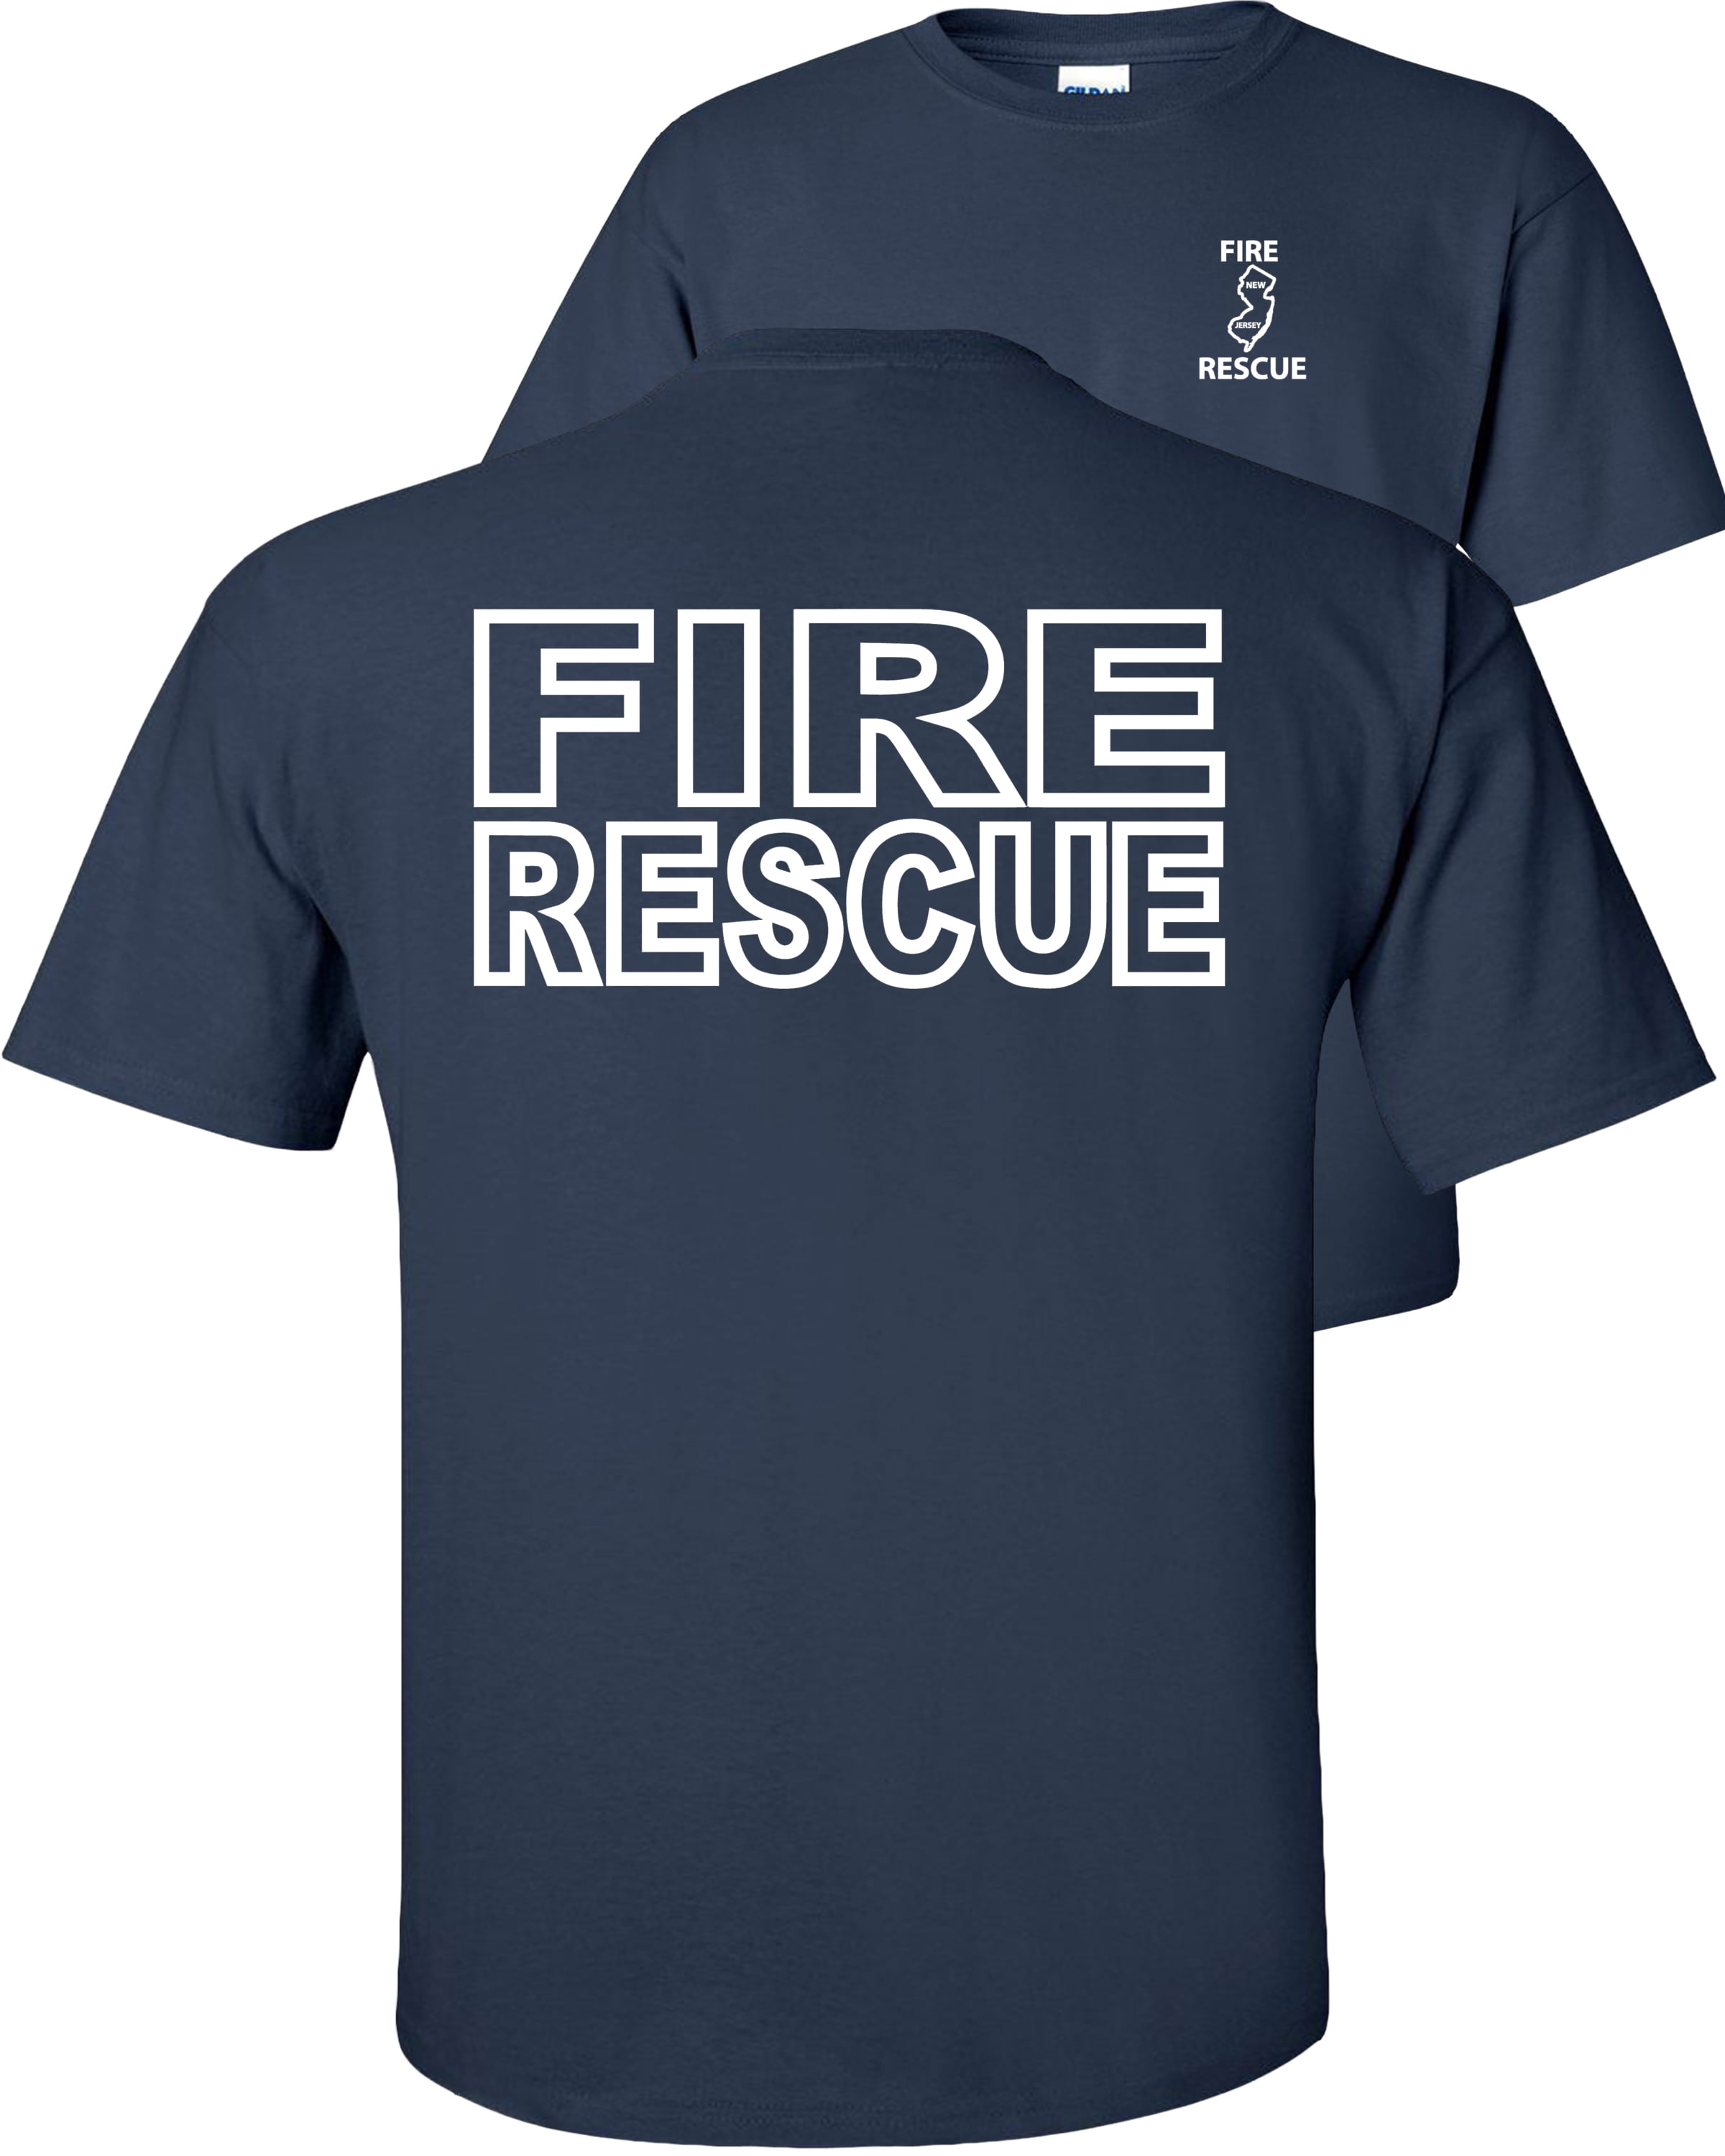 Fair Game Fire Rescue T-Shirt All US 50 States fire and rescue-Navy-M ...